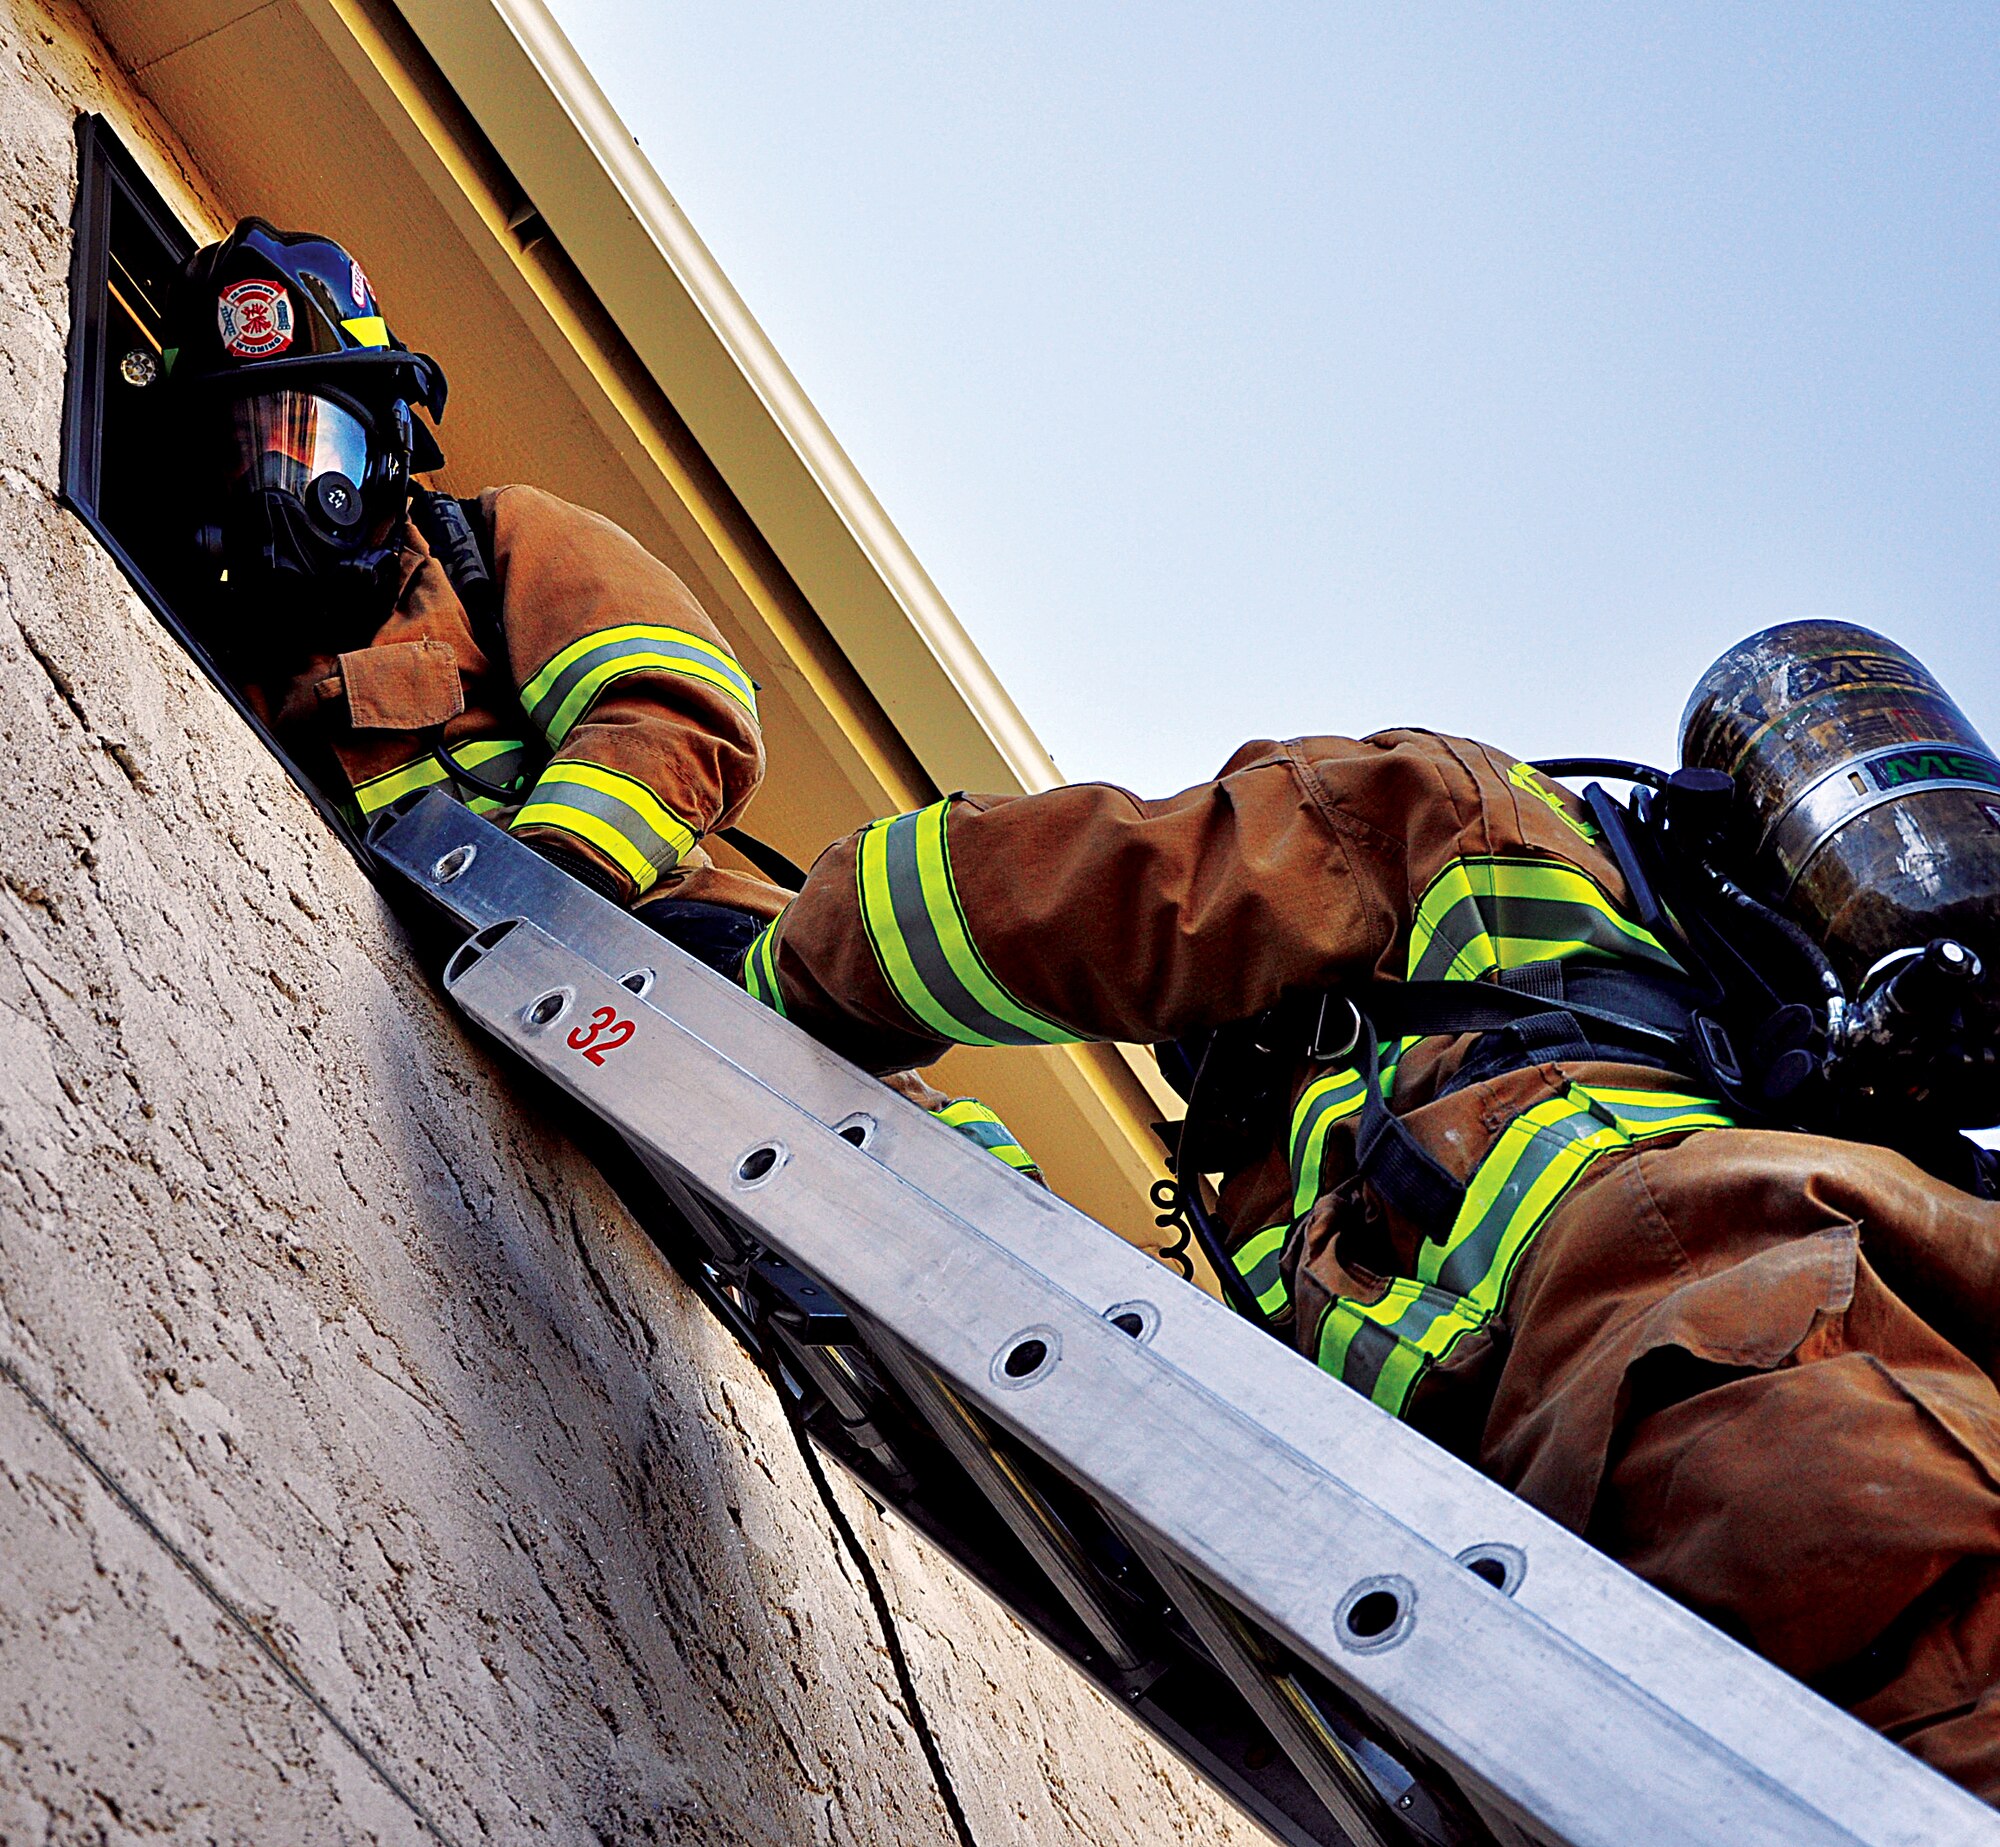 130829-F-DY381-056
Airmen 1st Class Nicholas Meno, above left, and Matthew Anderson, 90th Civil Engineer Fire Department firefighters, exit a house after performing a window rescue Aug. 29, 2013, during a week-long joint training exercise with the Cheyenne, Wyo., fire department. A window rescue consists of breeching a window, firefighters climbing into the building through the breeched window, retrieving the individuals/animals trapped inside and then returning through the window to the outside. (U.S. Air Force photo by Senior Airman Mike Tryon)
